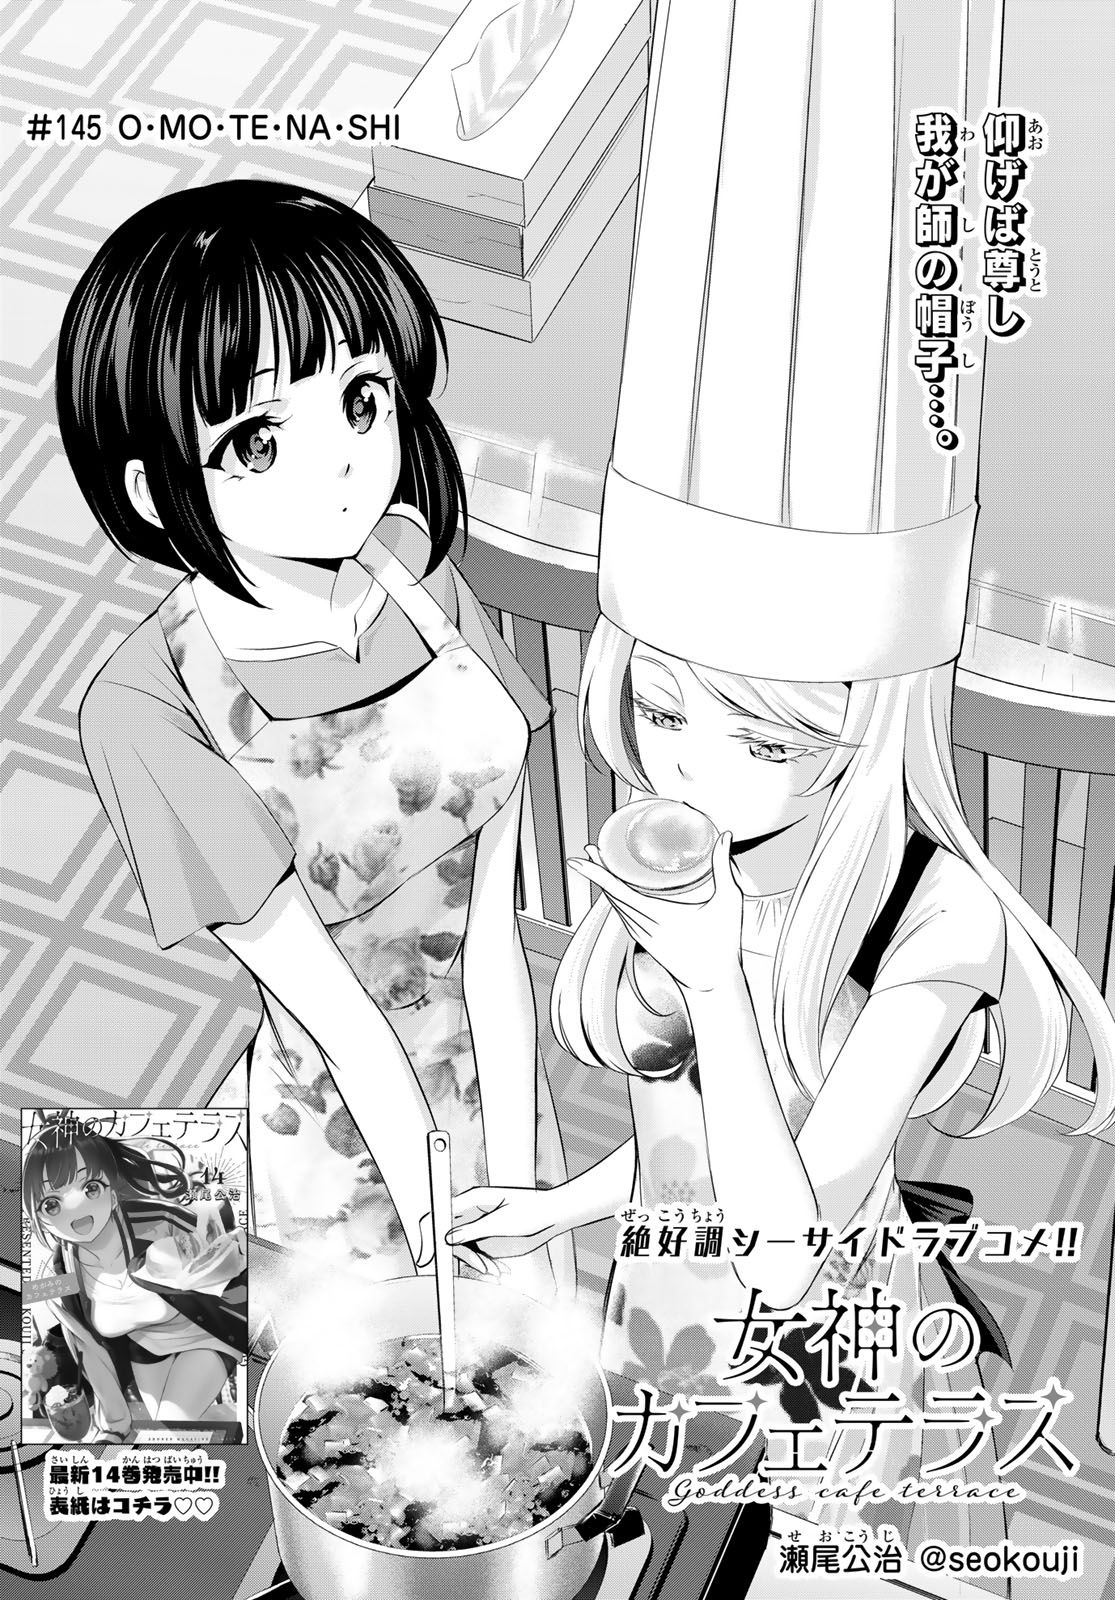 Megami no Cafe Terace - Chapter 145 - Page 2